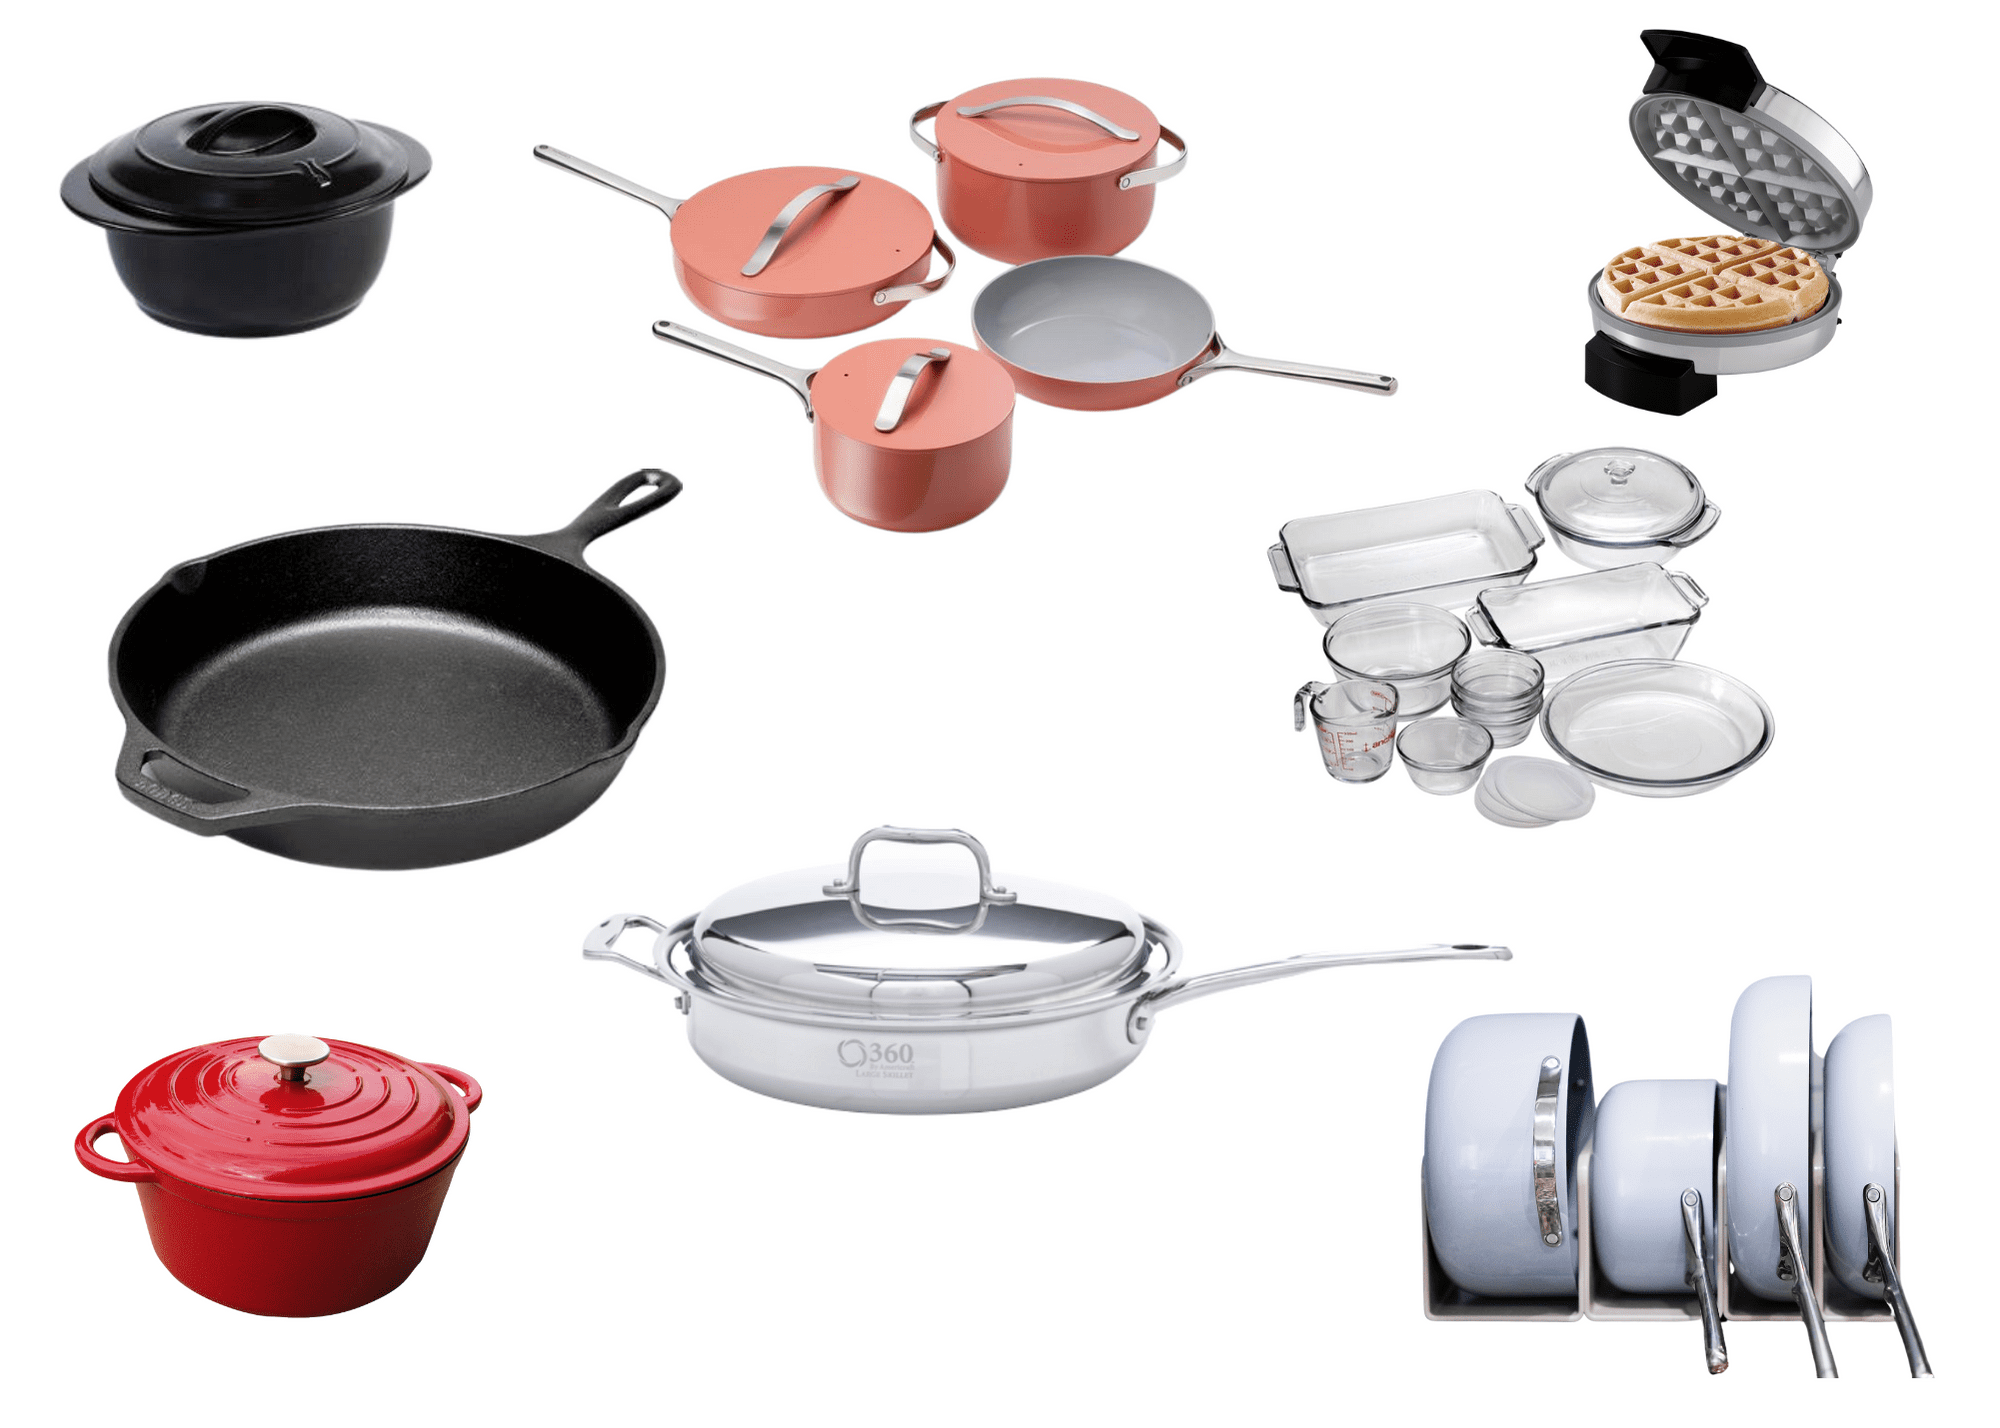 Home Hero 20 Pcs Pots and Pans Set Non Stick - All-In-One Induction Granite  Cookware Set + Bakeware Set - Non Toxic, PFOA Free, Oven Safe Pot and Pan